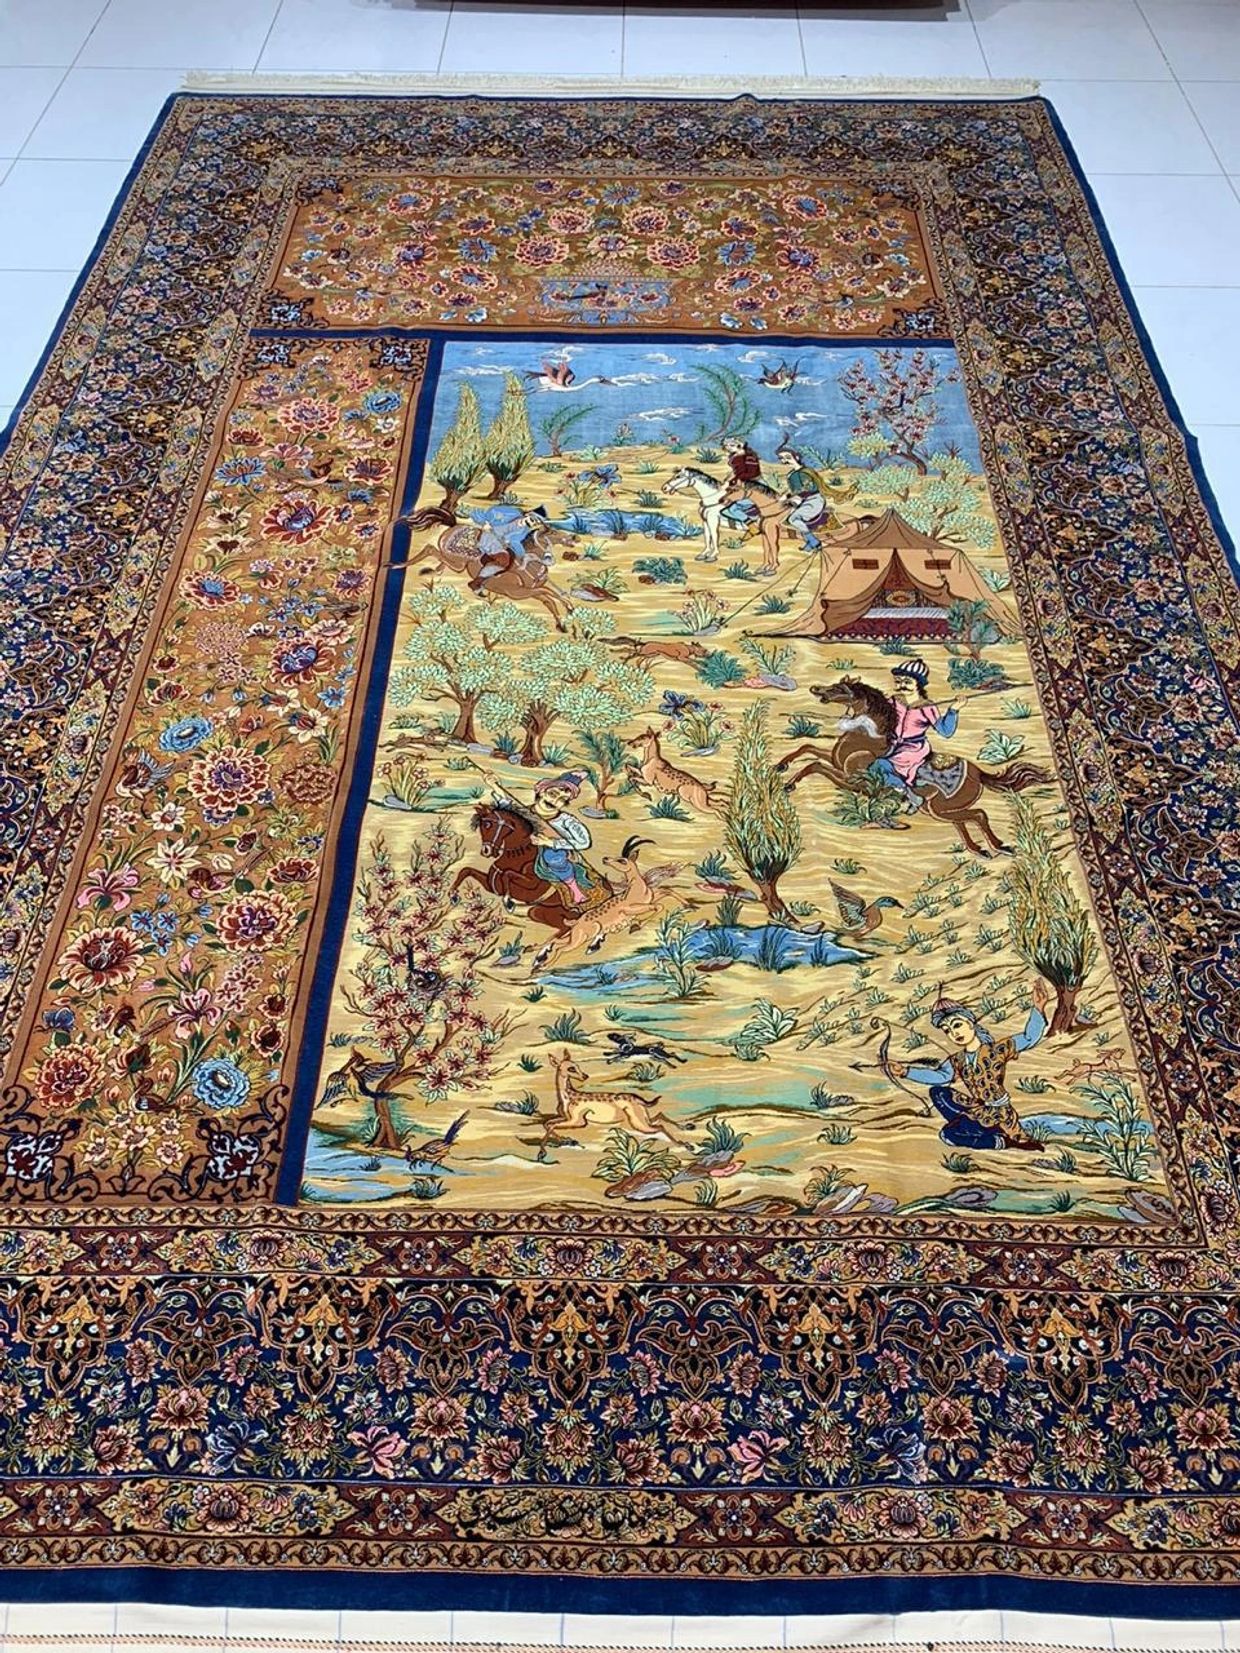 Magnificent handmade hand knotted asymmetric Qom silk Persian rug with hunting design featured.